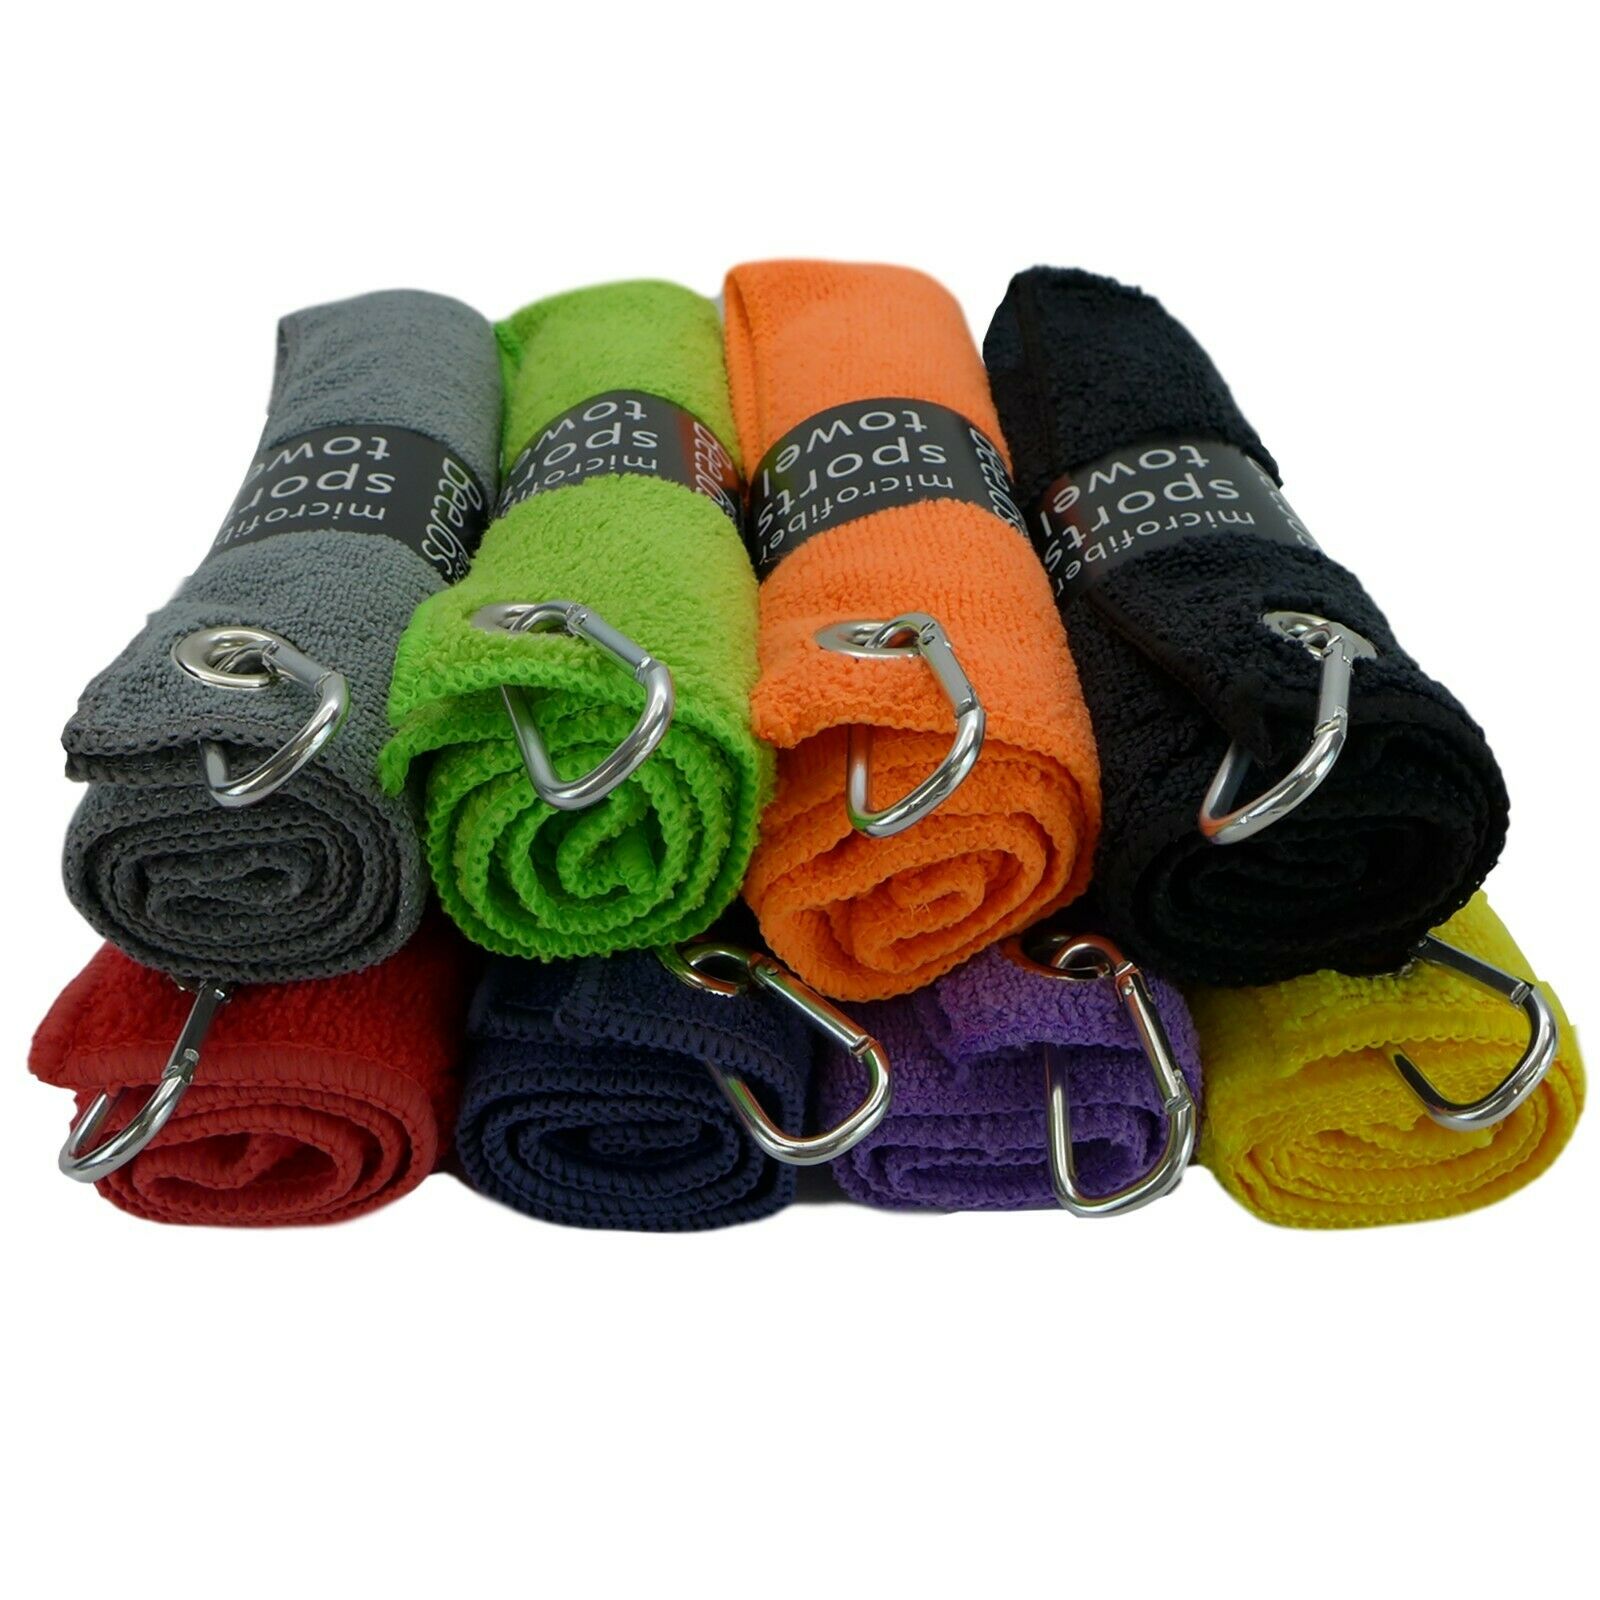 3 Pack Of Premium Colored Microfiber Golf Towels 16" X 16"  With Carabiner Clip